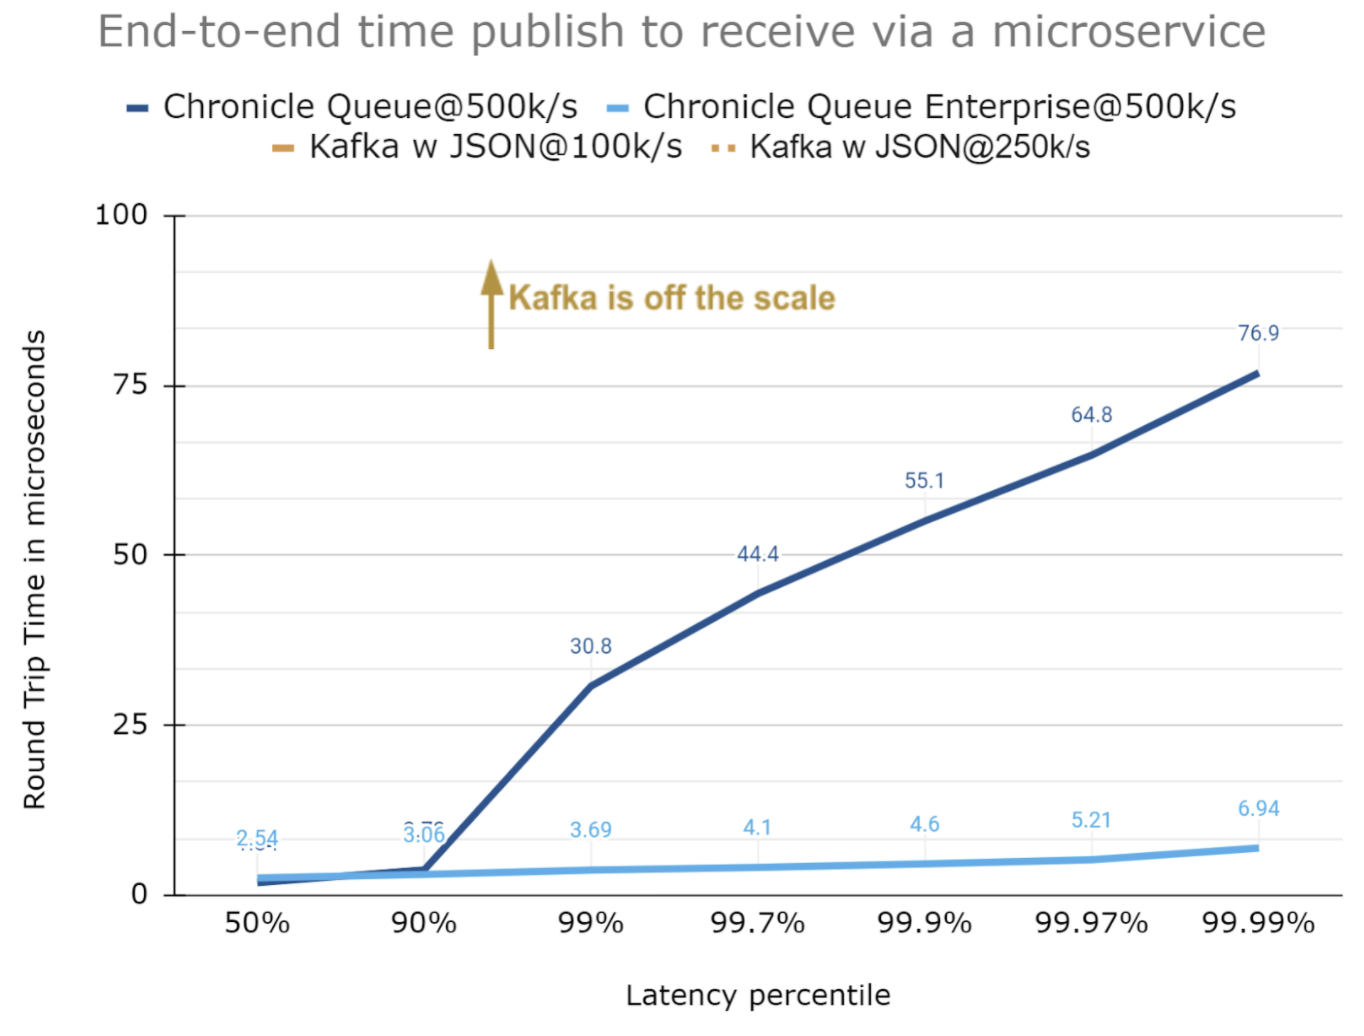 Chronicle exhibiting lower latency compared to Kafka